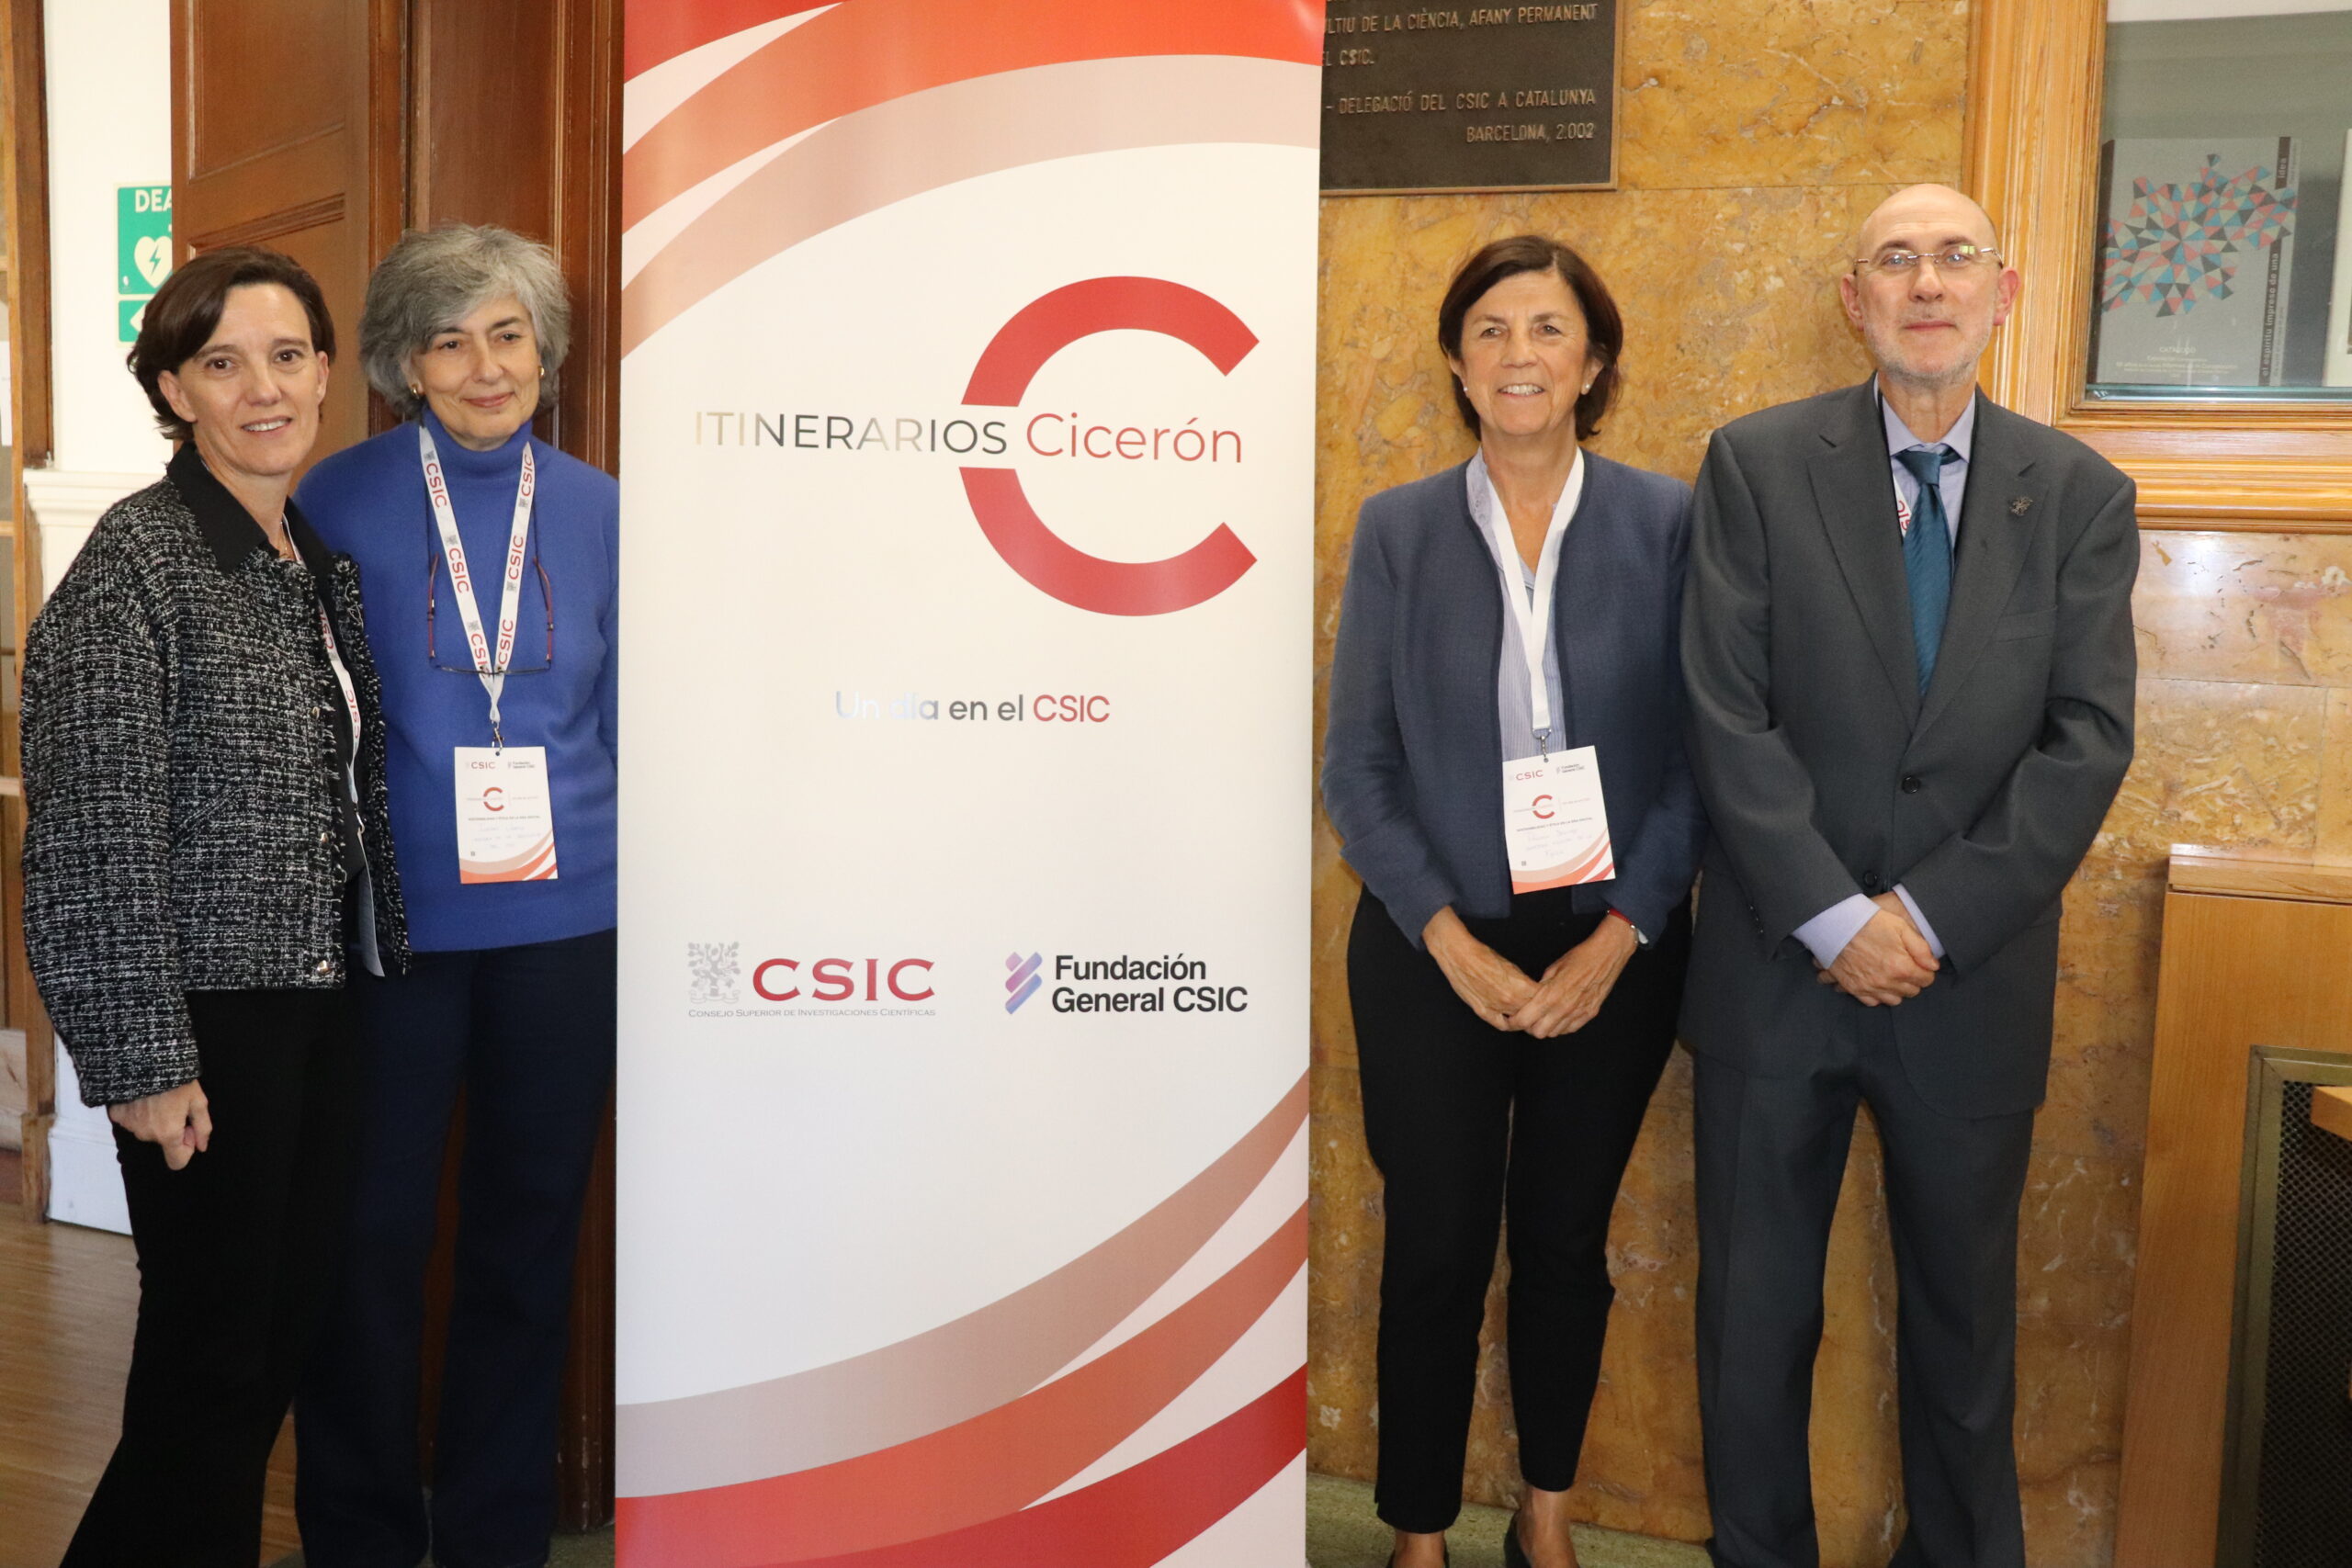 CSICs’ researchers have faced the future of sustainability and ethics in the digital society today in Barcelona